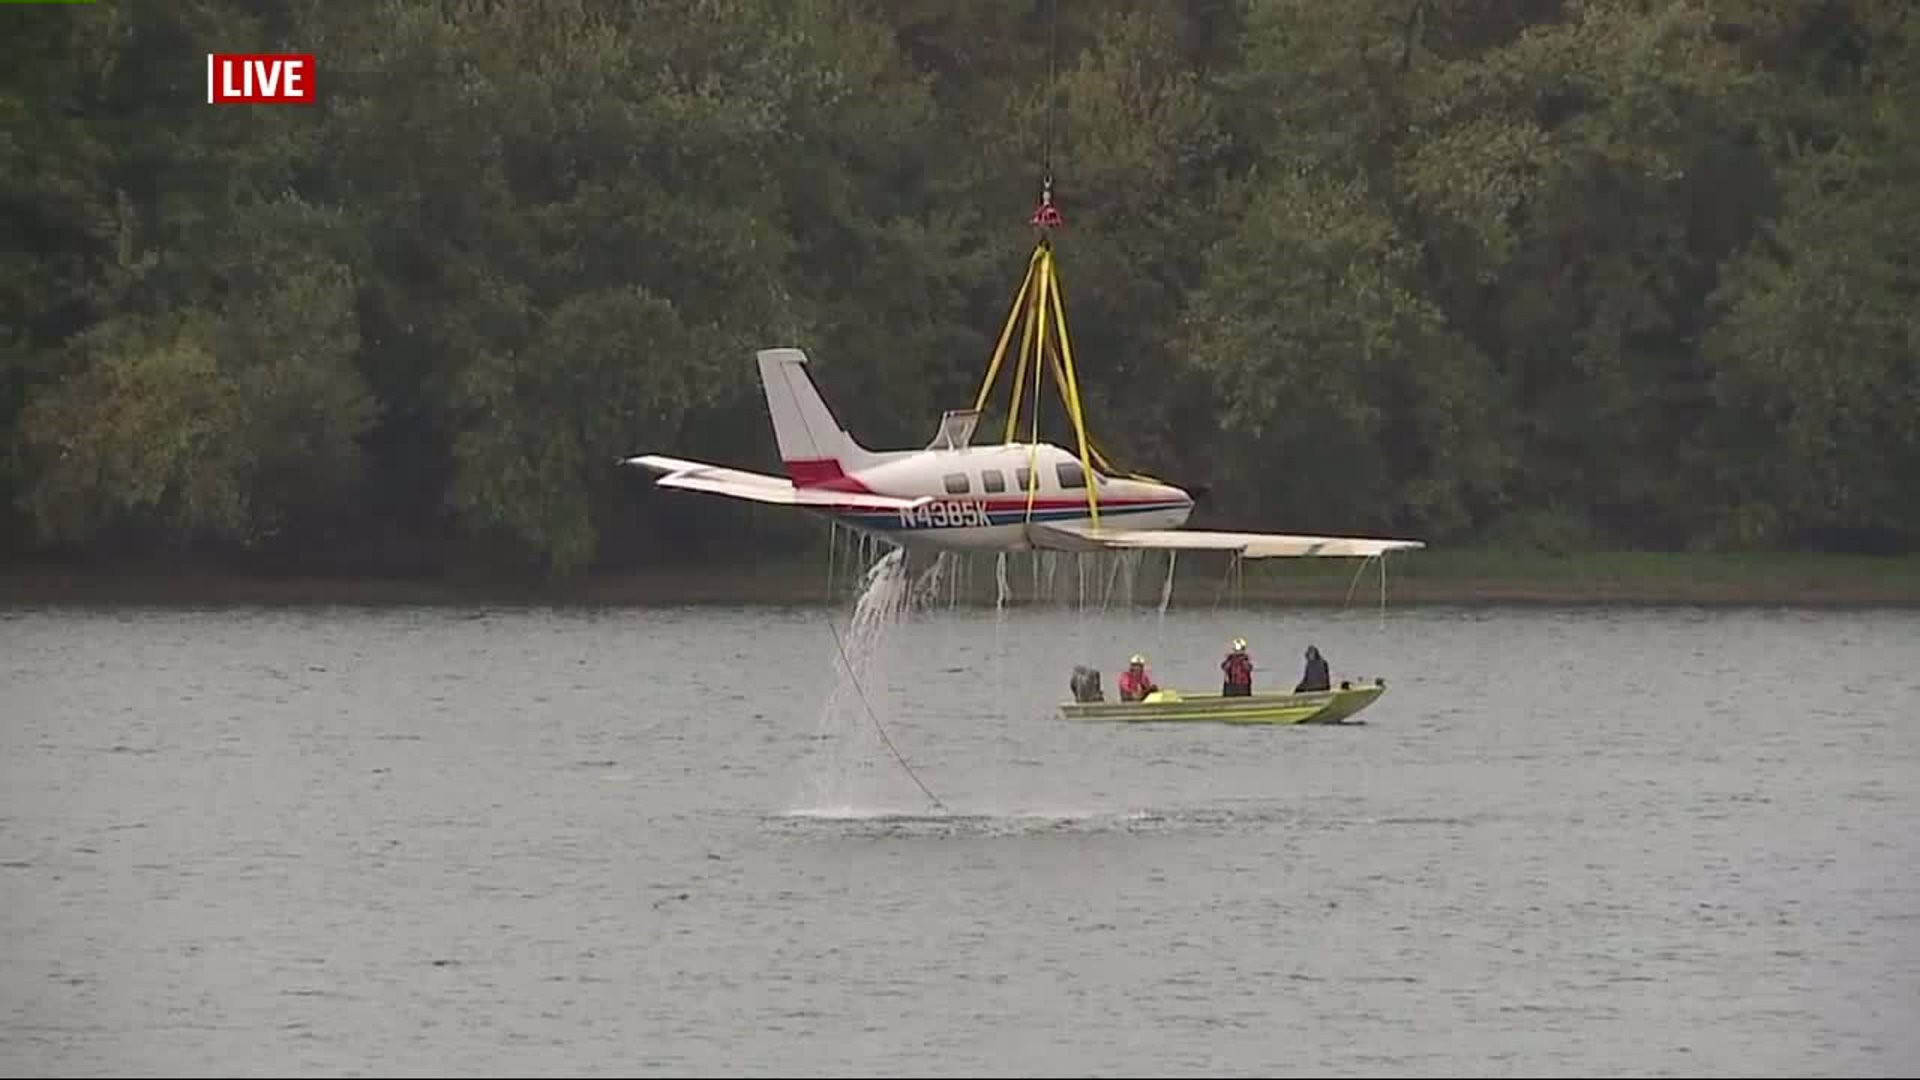 ICYMI: coverage of plane removed from Susquehanna River